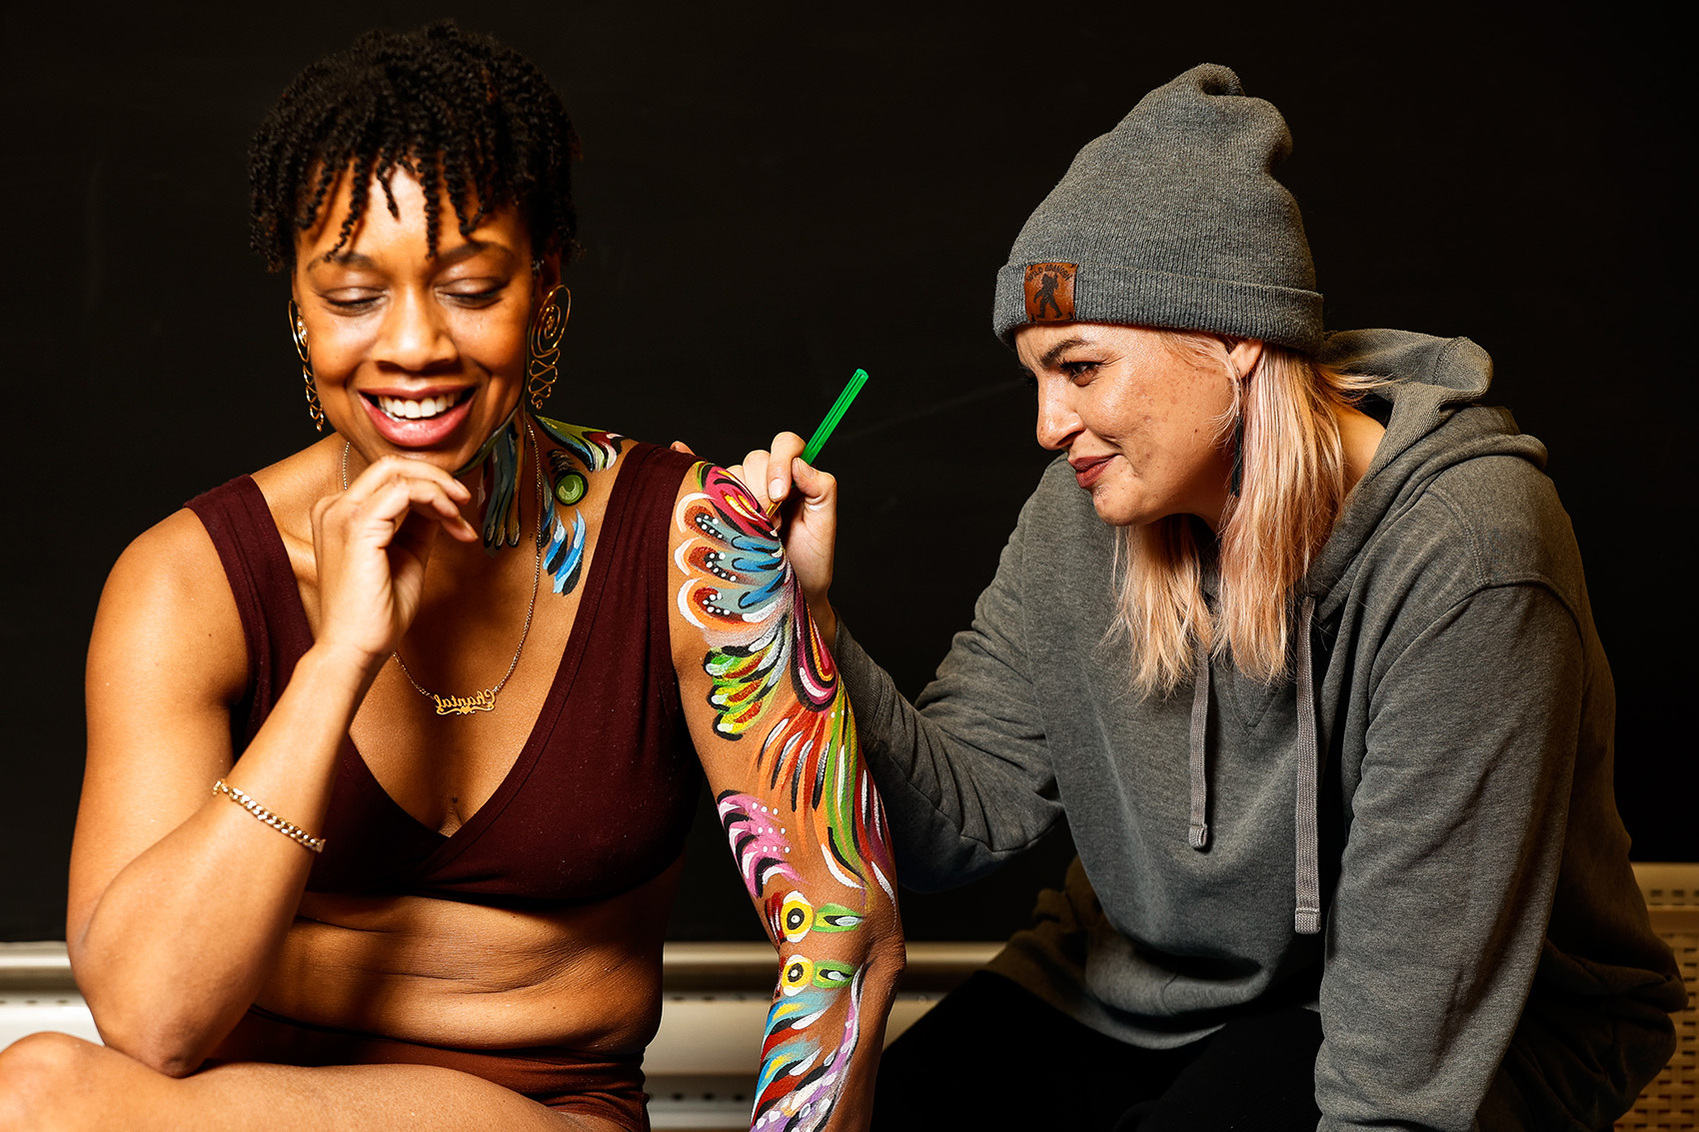  Body painting artist Melissa Brant paints on volunteer Chantal Carter’s body in her art studio. Brant studied to become a makeup artist before becoming a body painting artist. 